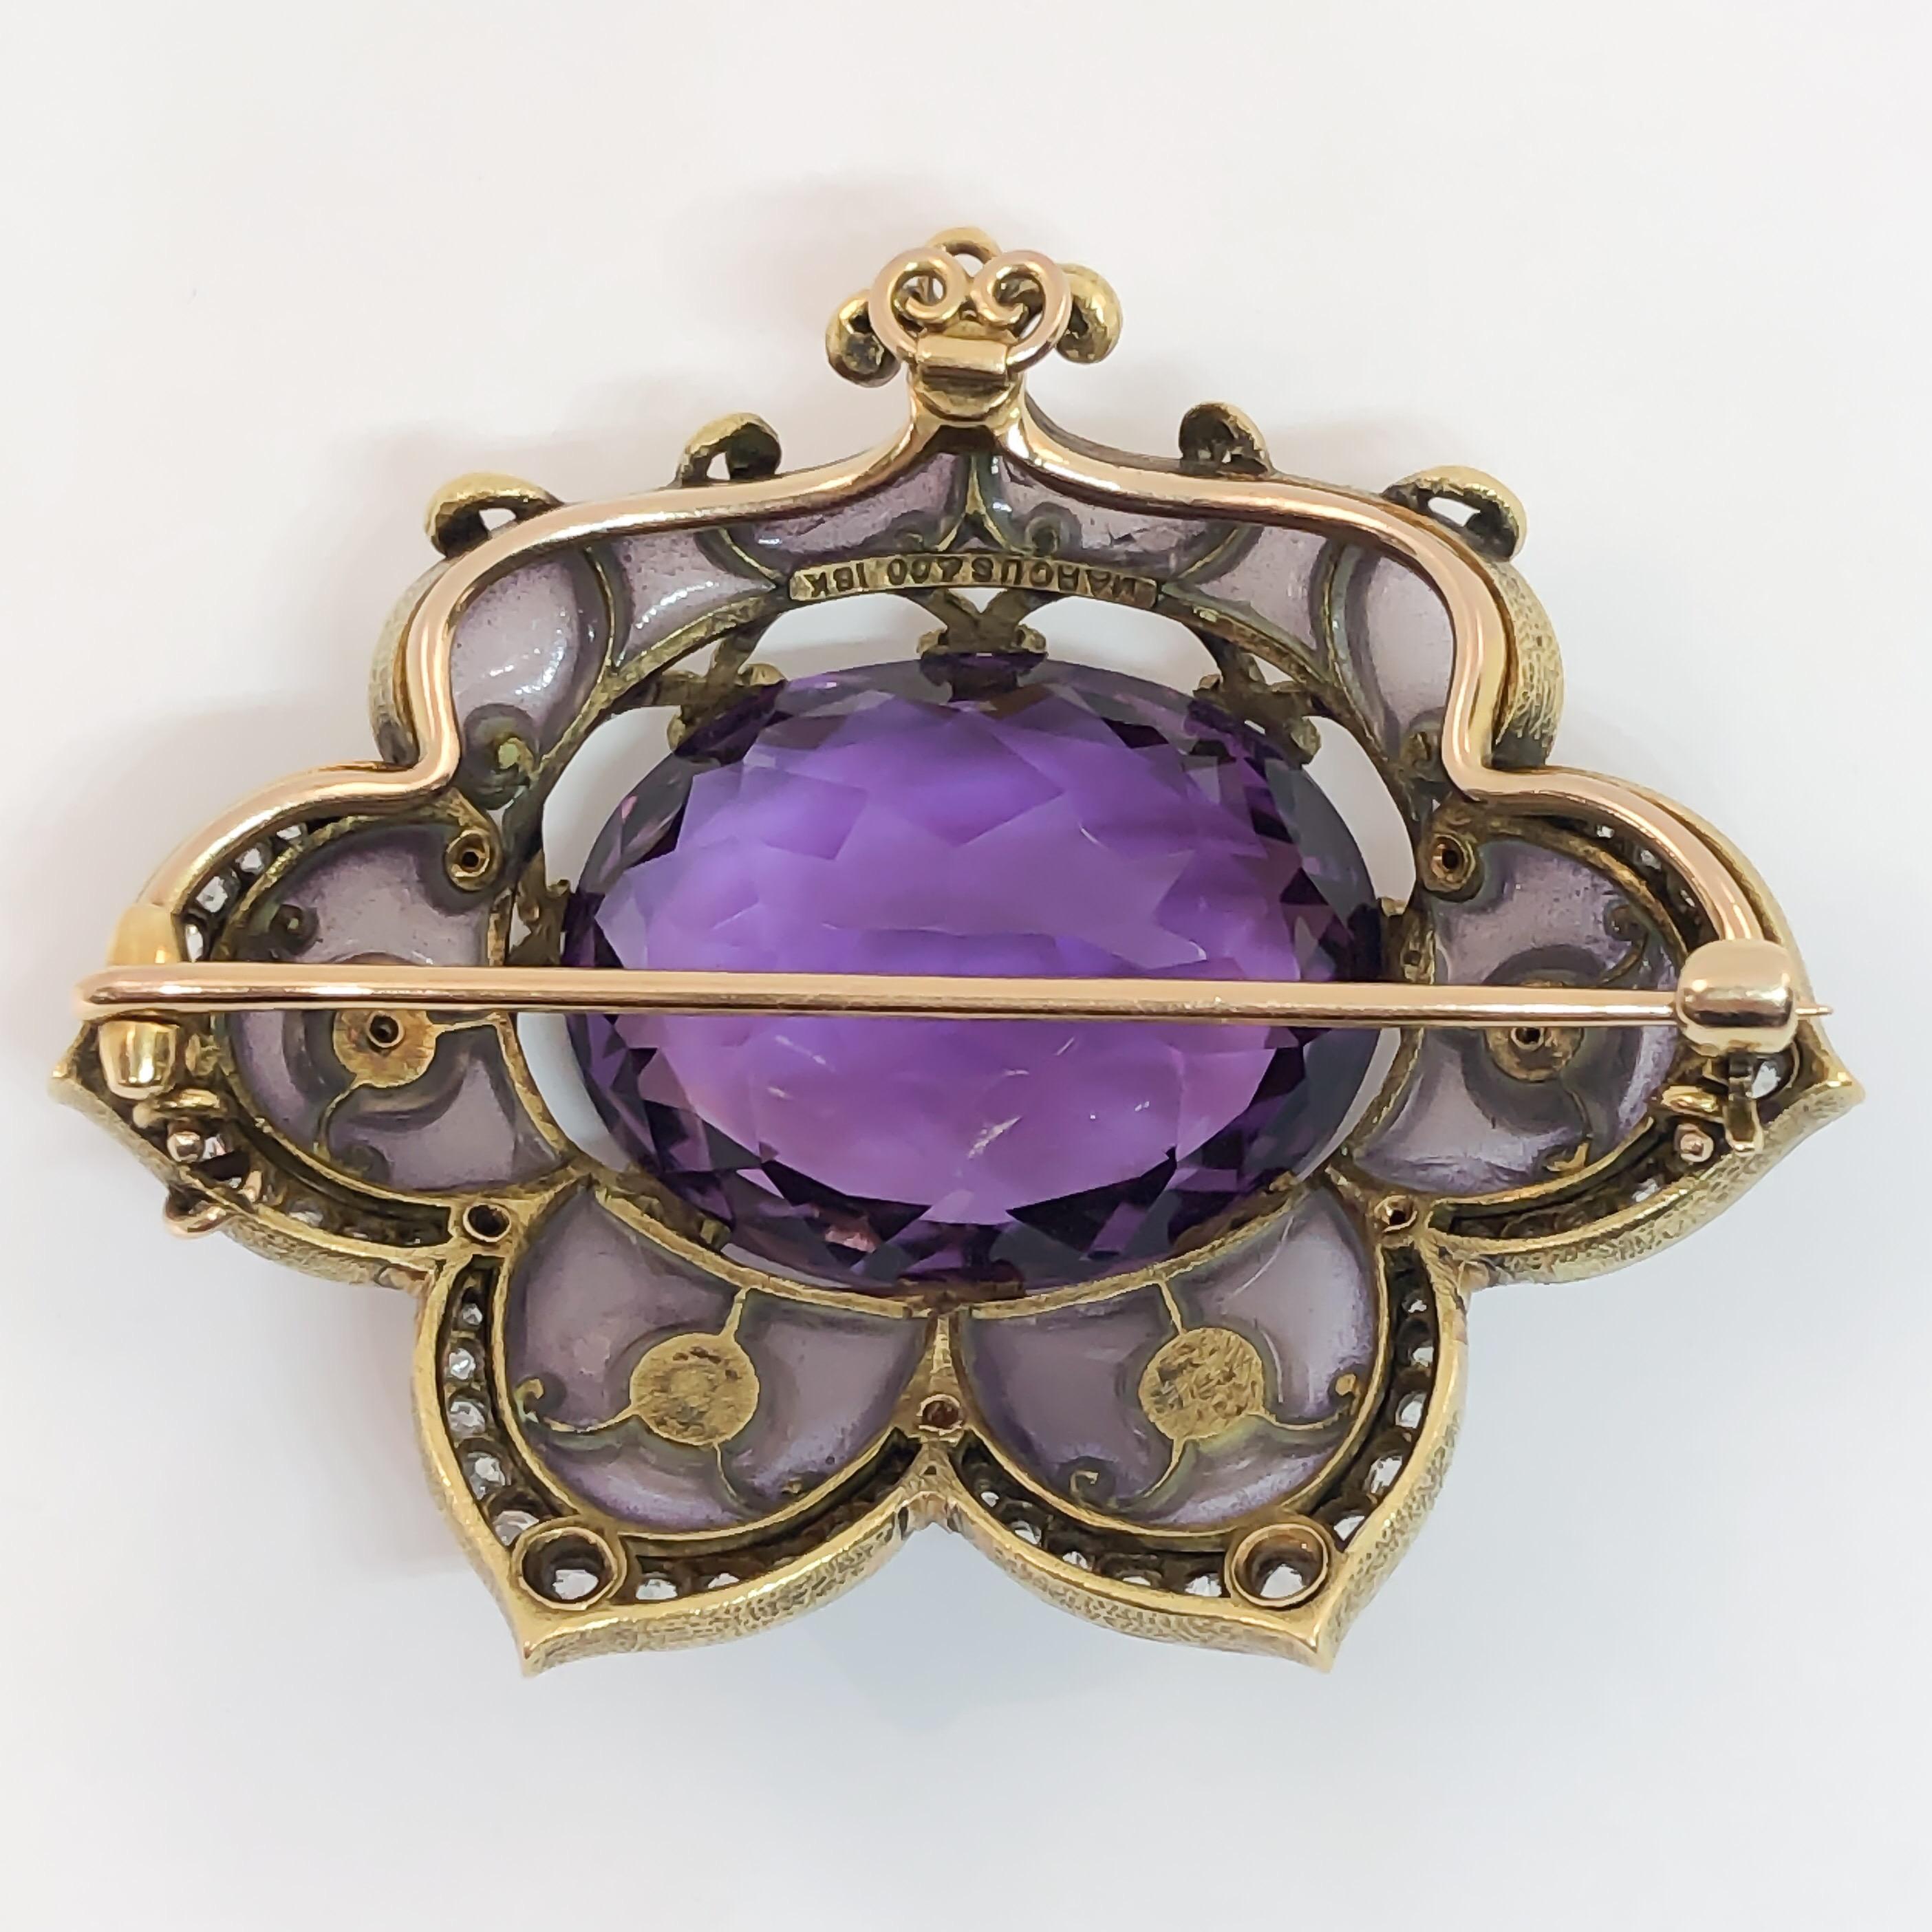 Marcus & Co Plique-à-Jour Art Nouveau Brooch 

Authentic antique large oval Amethyst brooch with diamond and pearls. The genuine fine quality faceted oval amethyst measures 23mm x 18mm weighing approximately 20 carats. The diamonds are set in